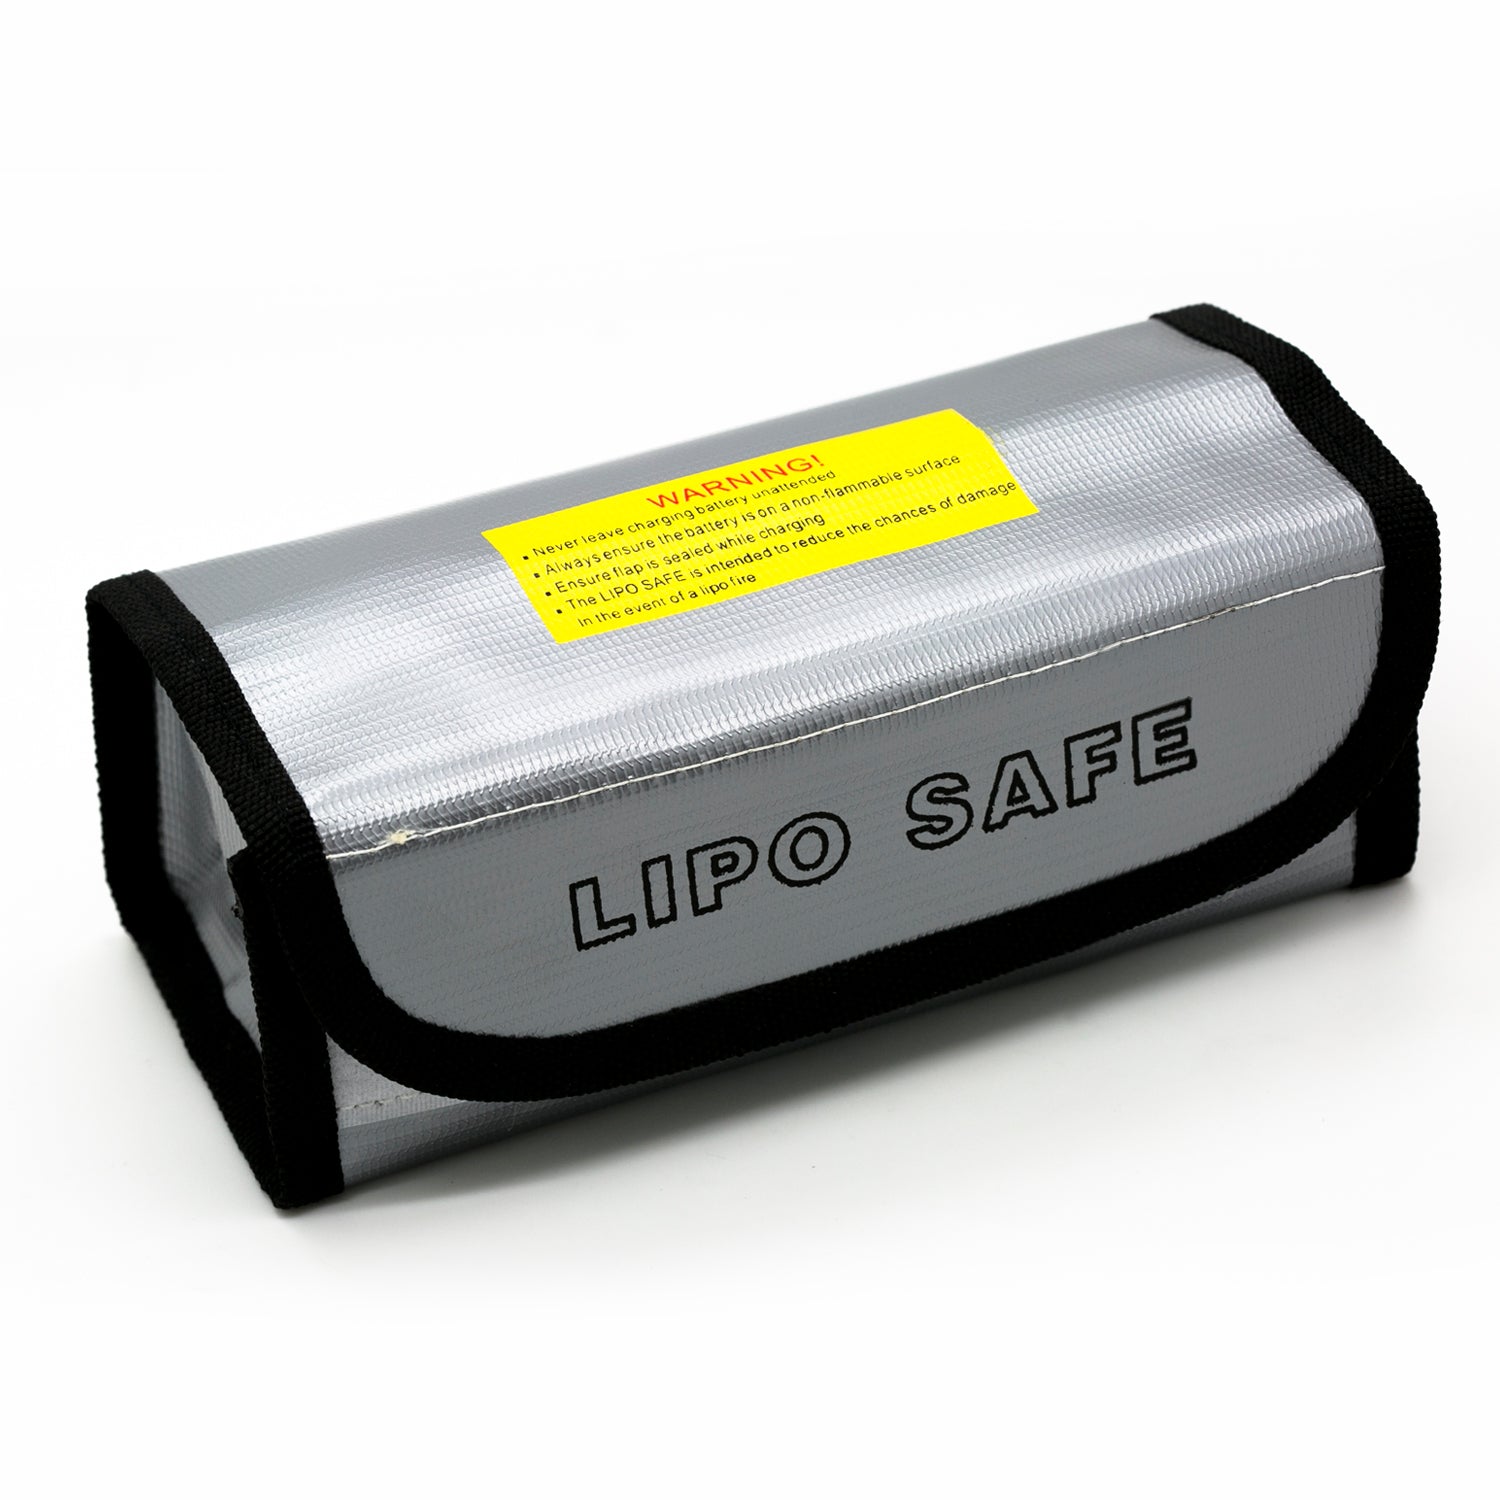 ExpertPower LiPo Fireproof Explosion-proof Safety Bag | Guard Charging and Storage Safe Bag - ExpertPower Direct